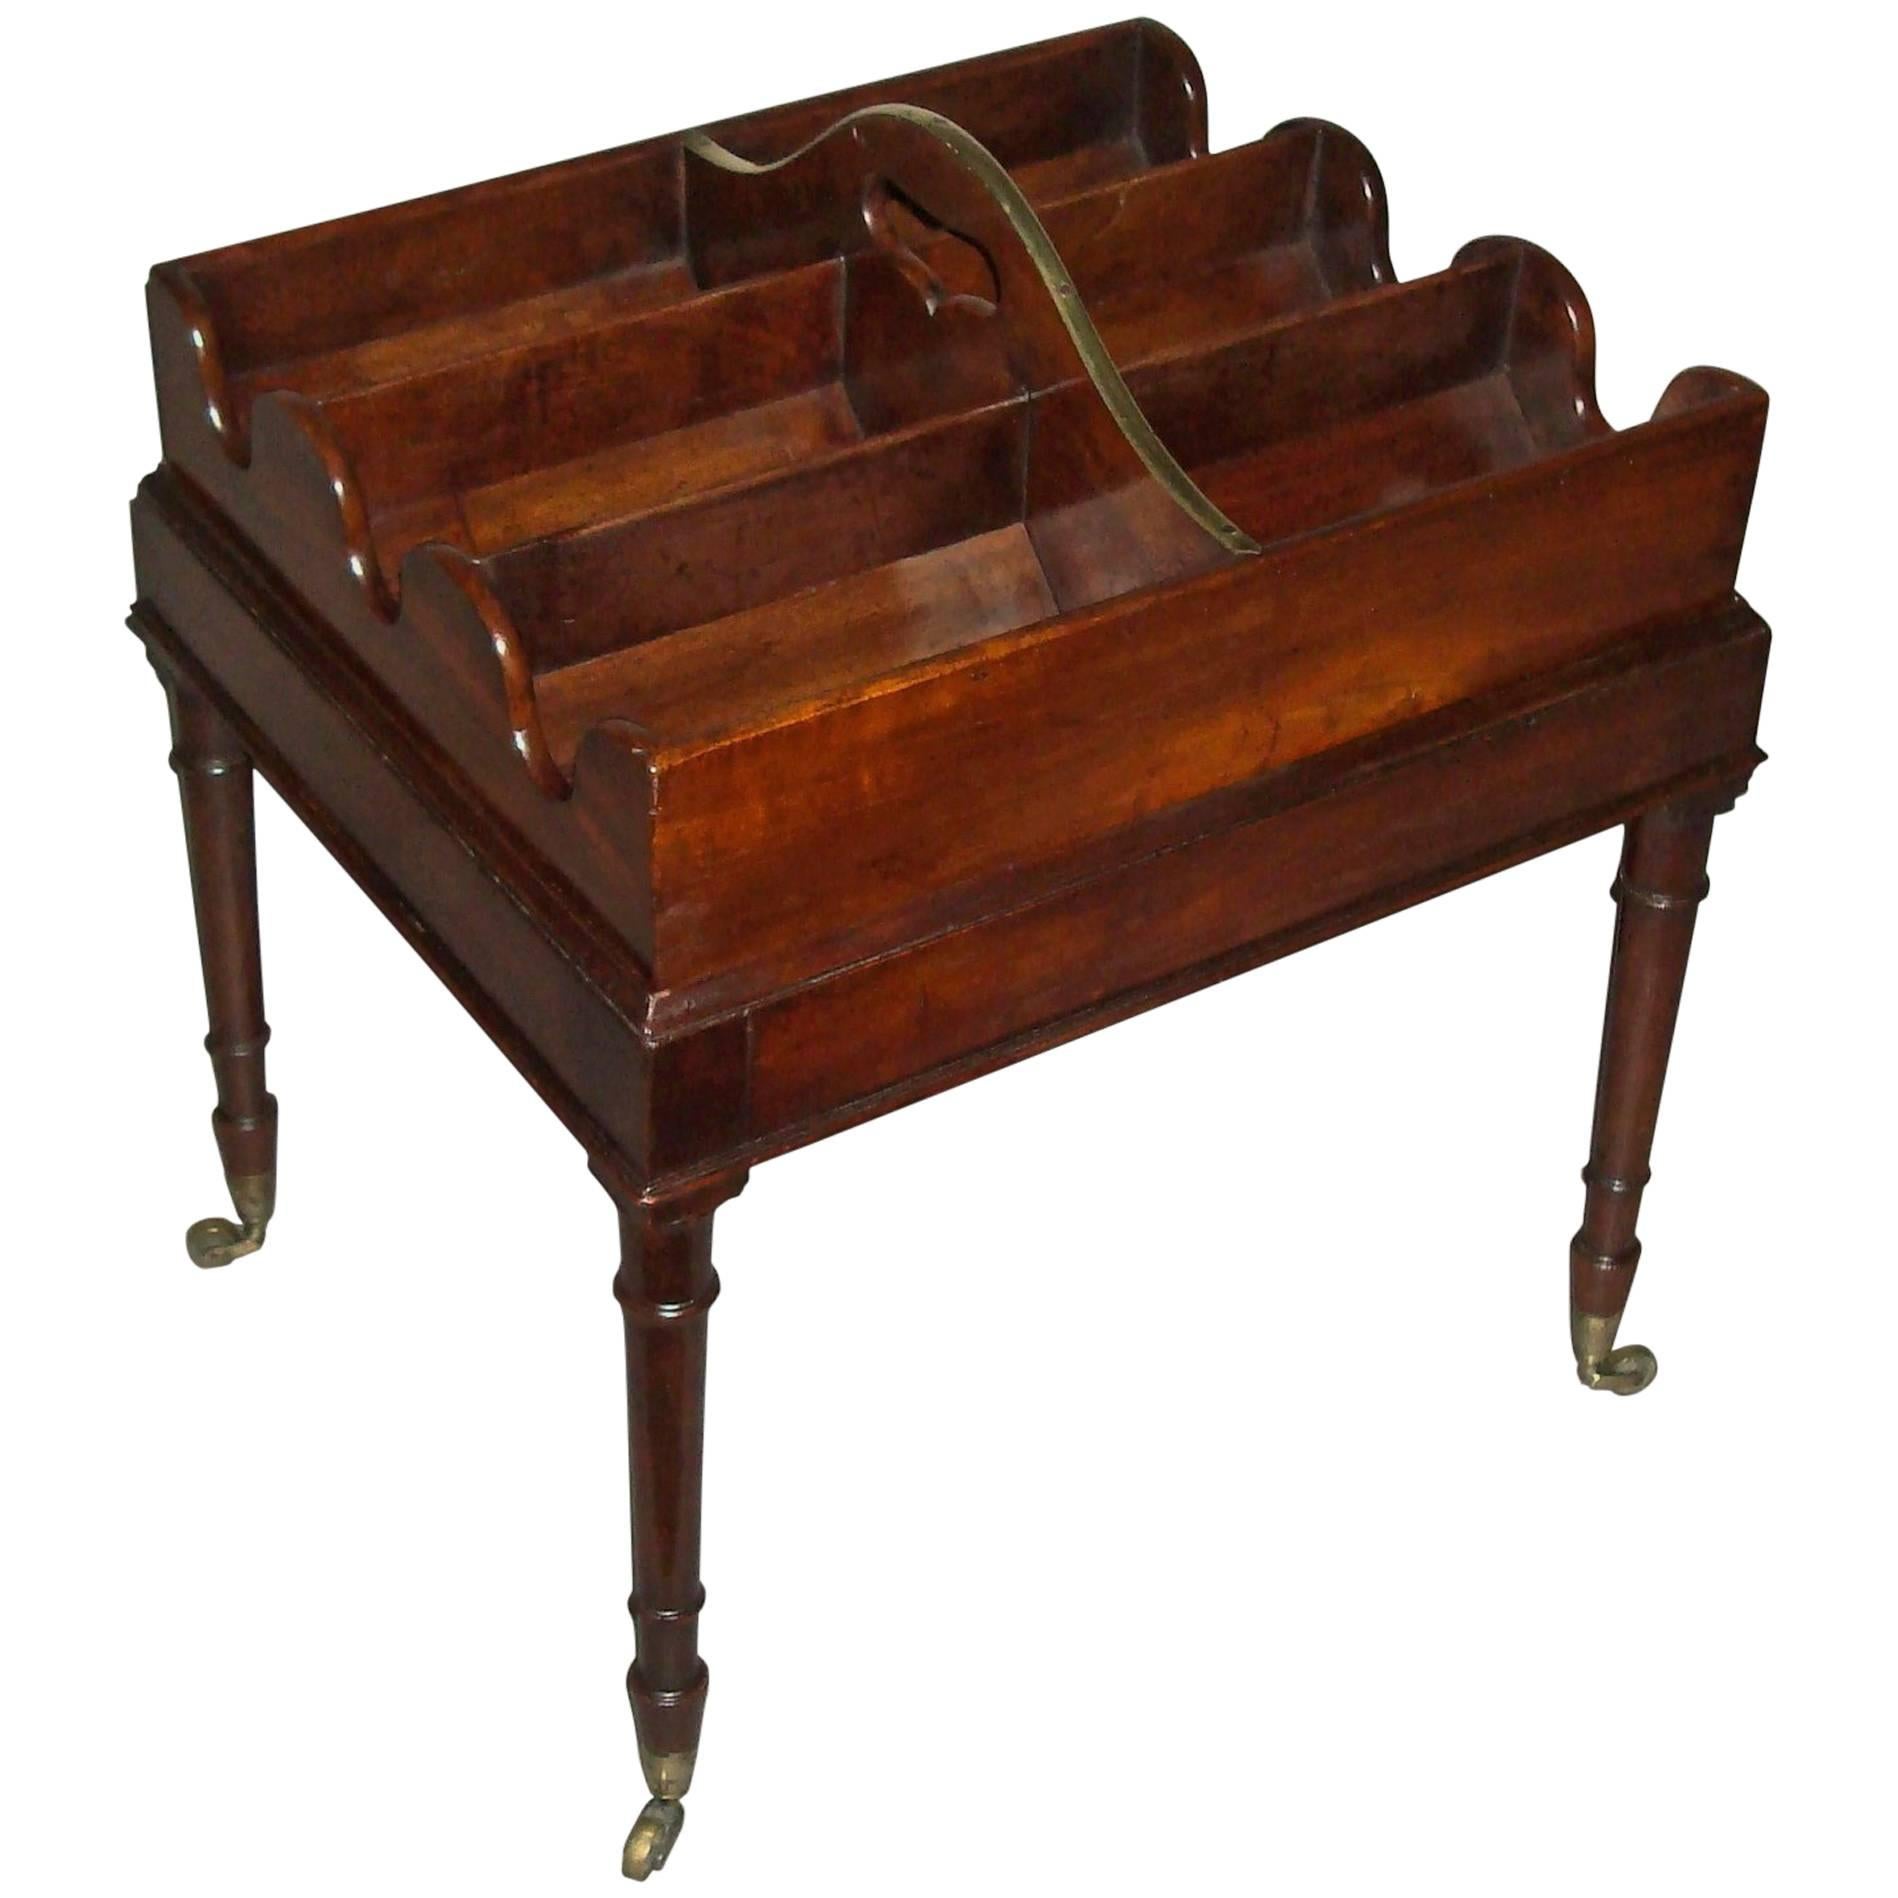 Unusual George III Mahogany Bottle Carrier on Stand